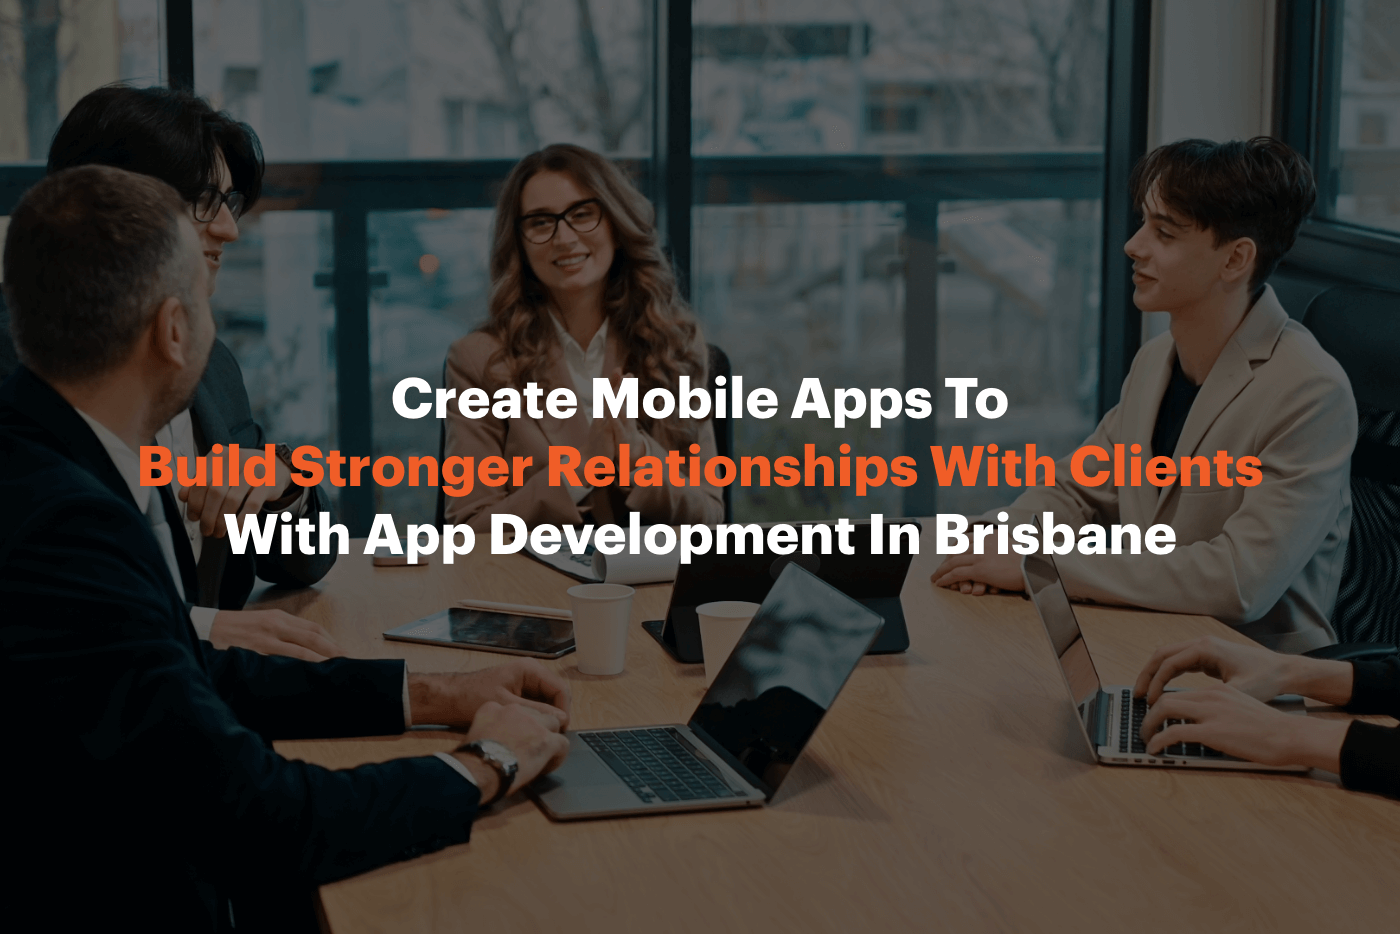 Create Mobile Apps To Build Stronger Relationships With Clients With App Development In Brisbane